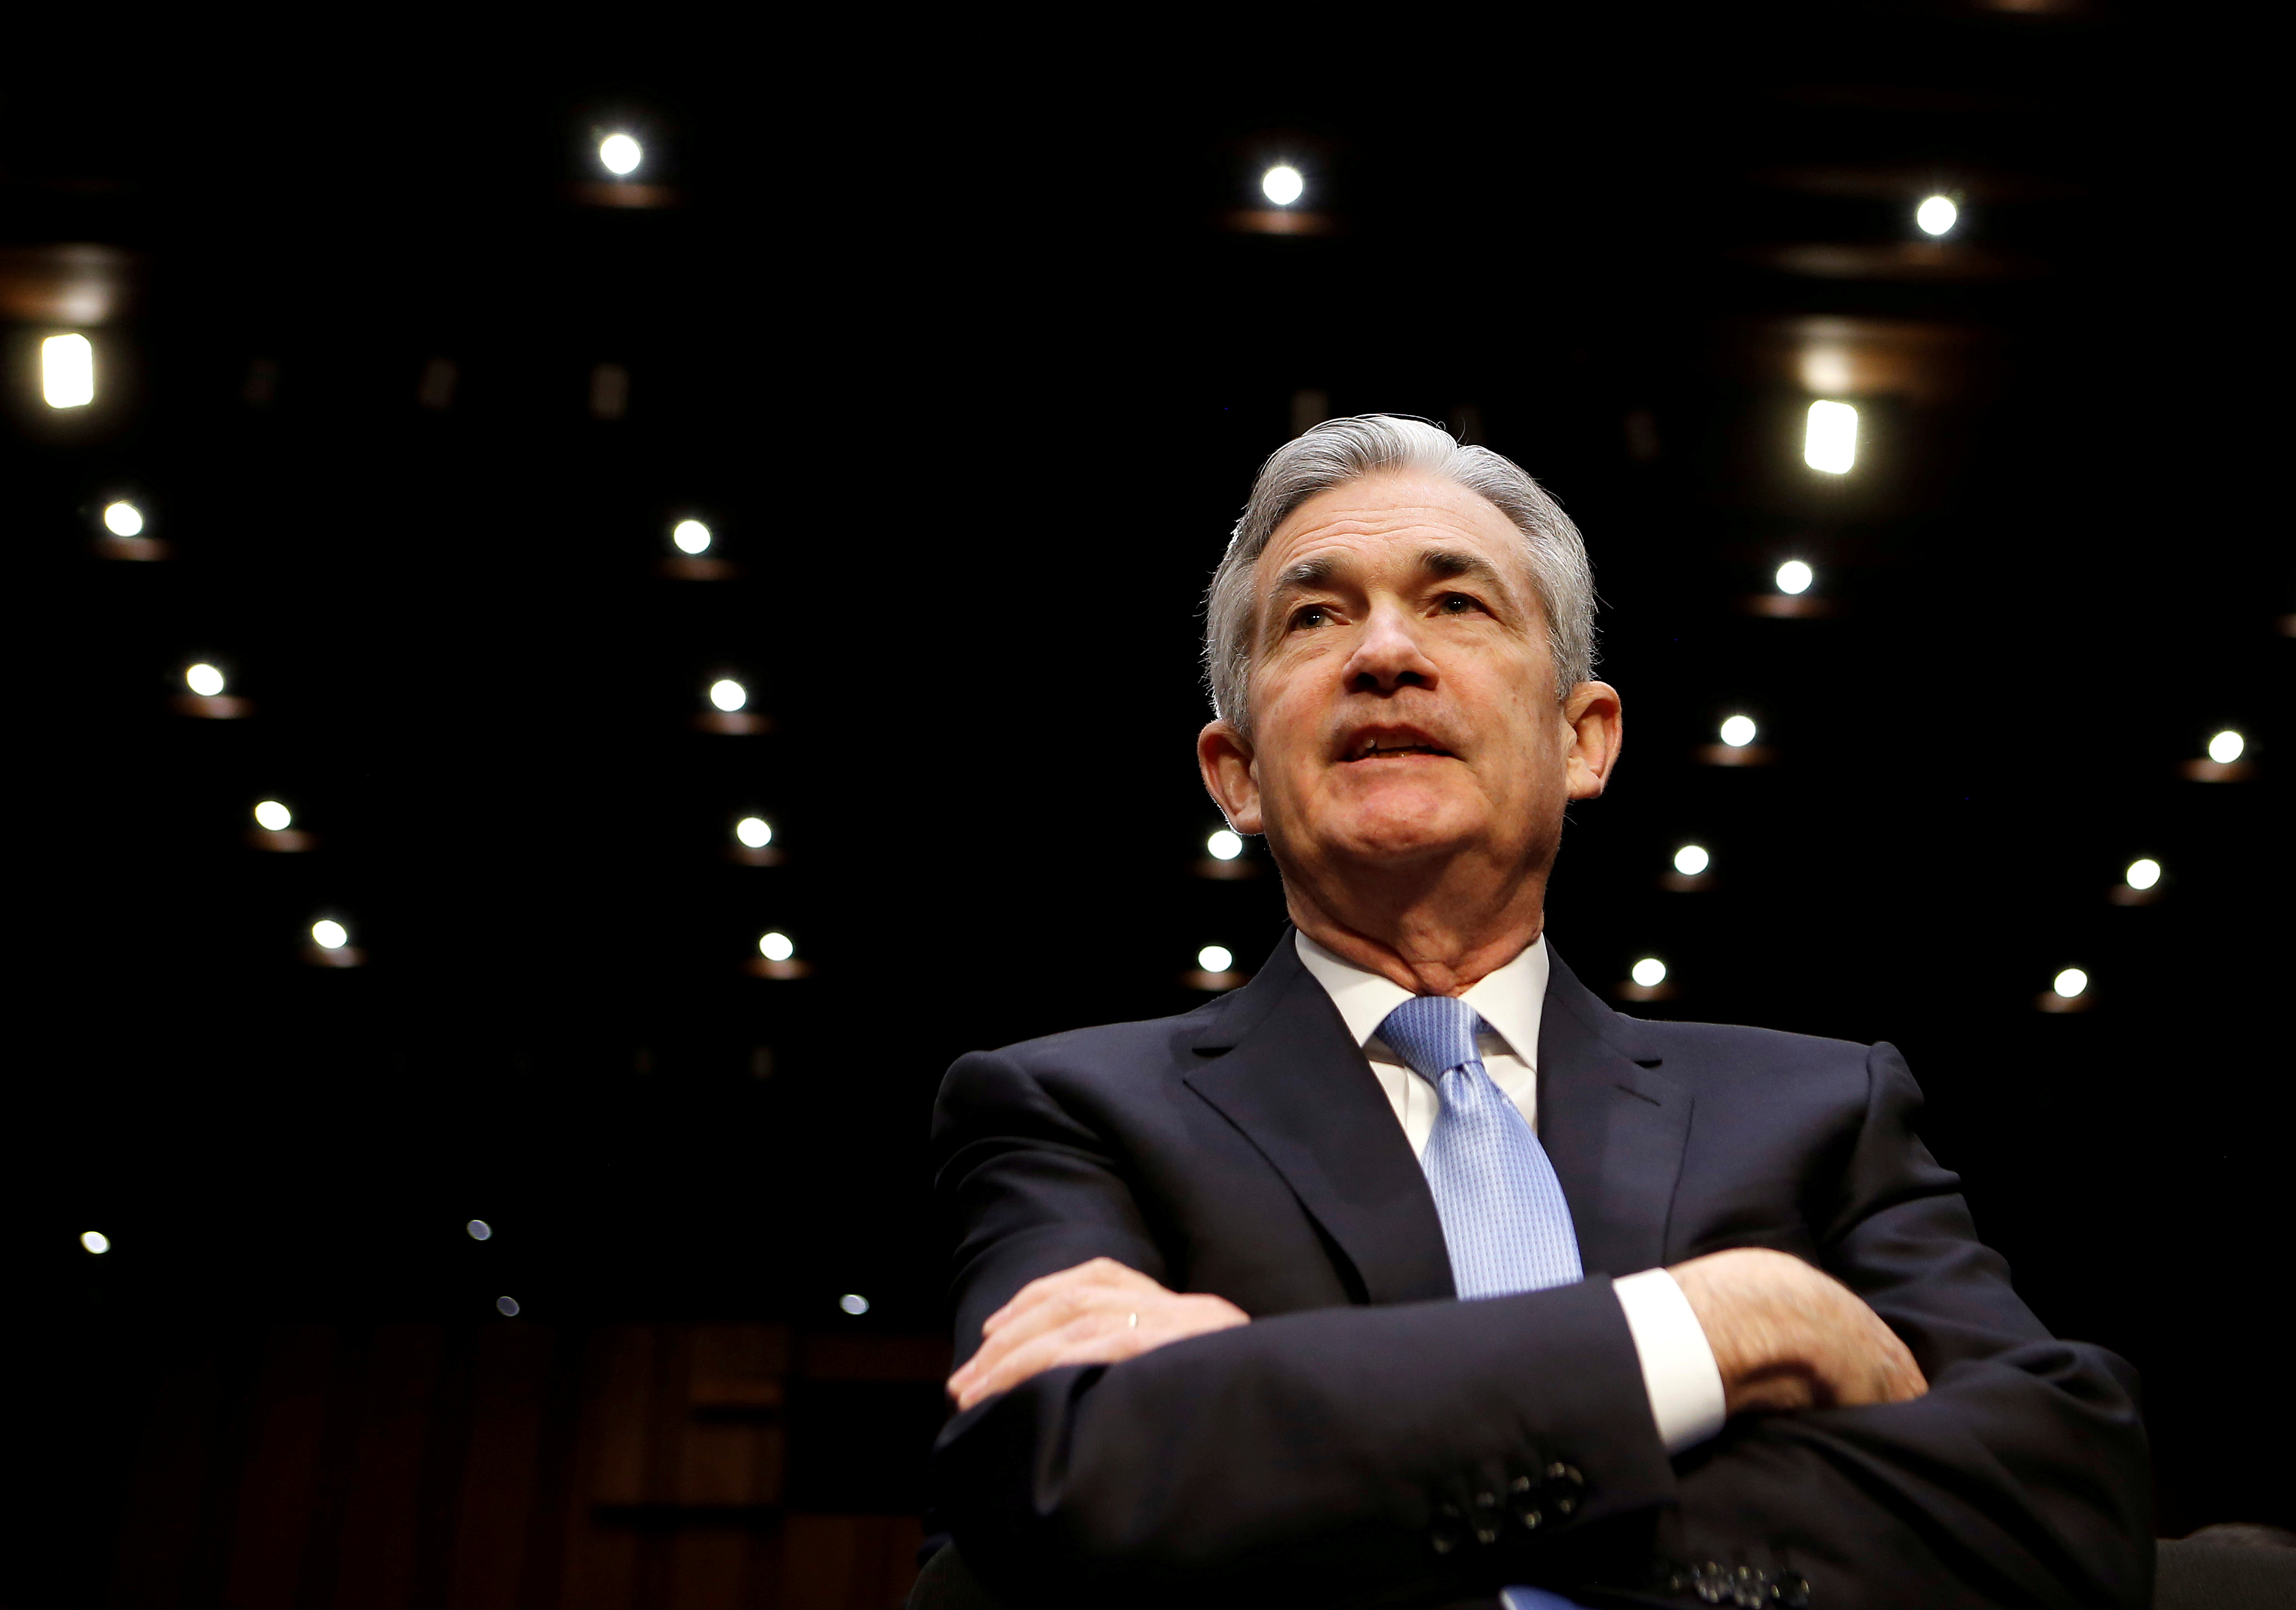 Jerome Powell testifies on his nomination to become chairman of the U.S. Federal Reserve in Washington